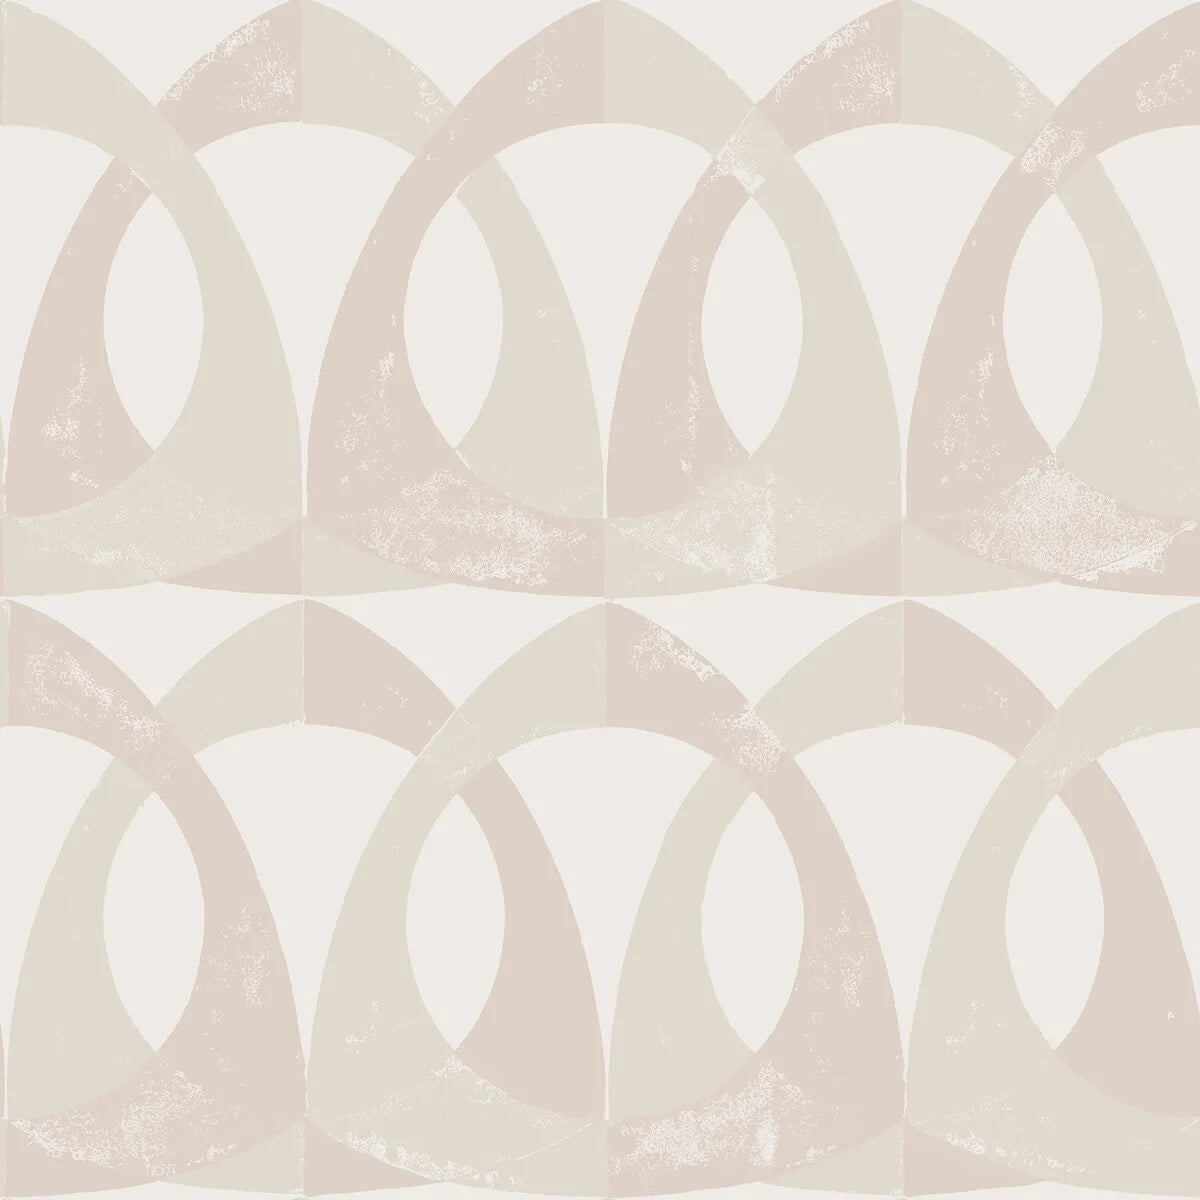 A calm, soothing wallpaper in muted shades of beige and pink with a chalk effect. 